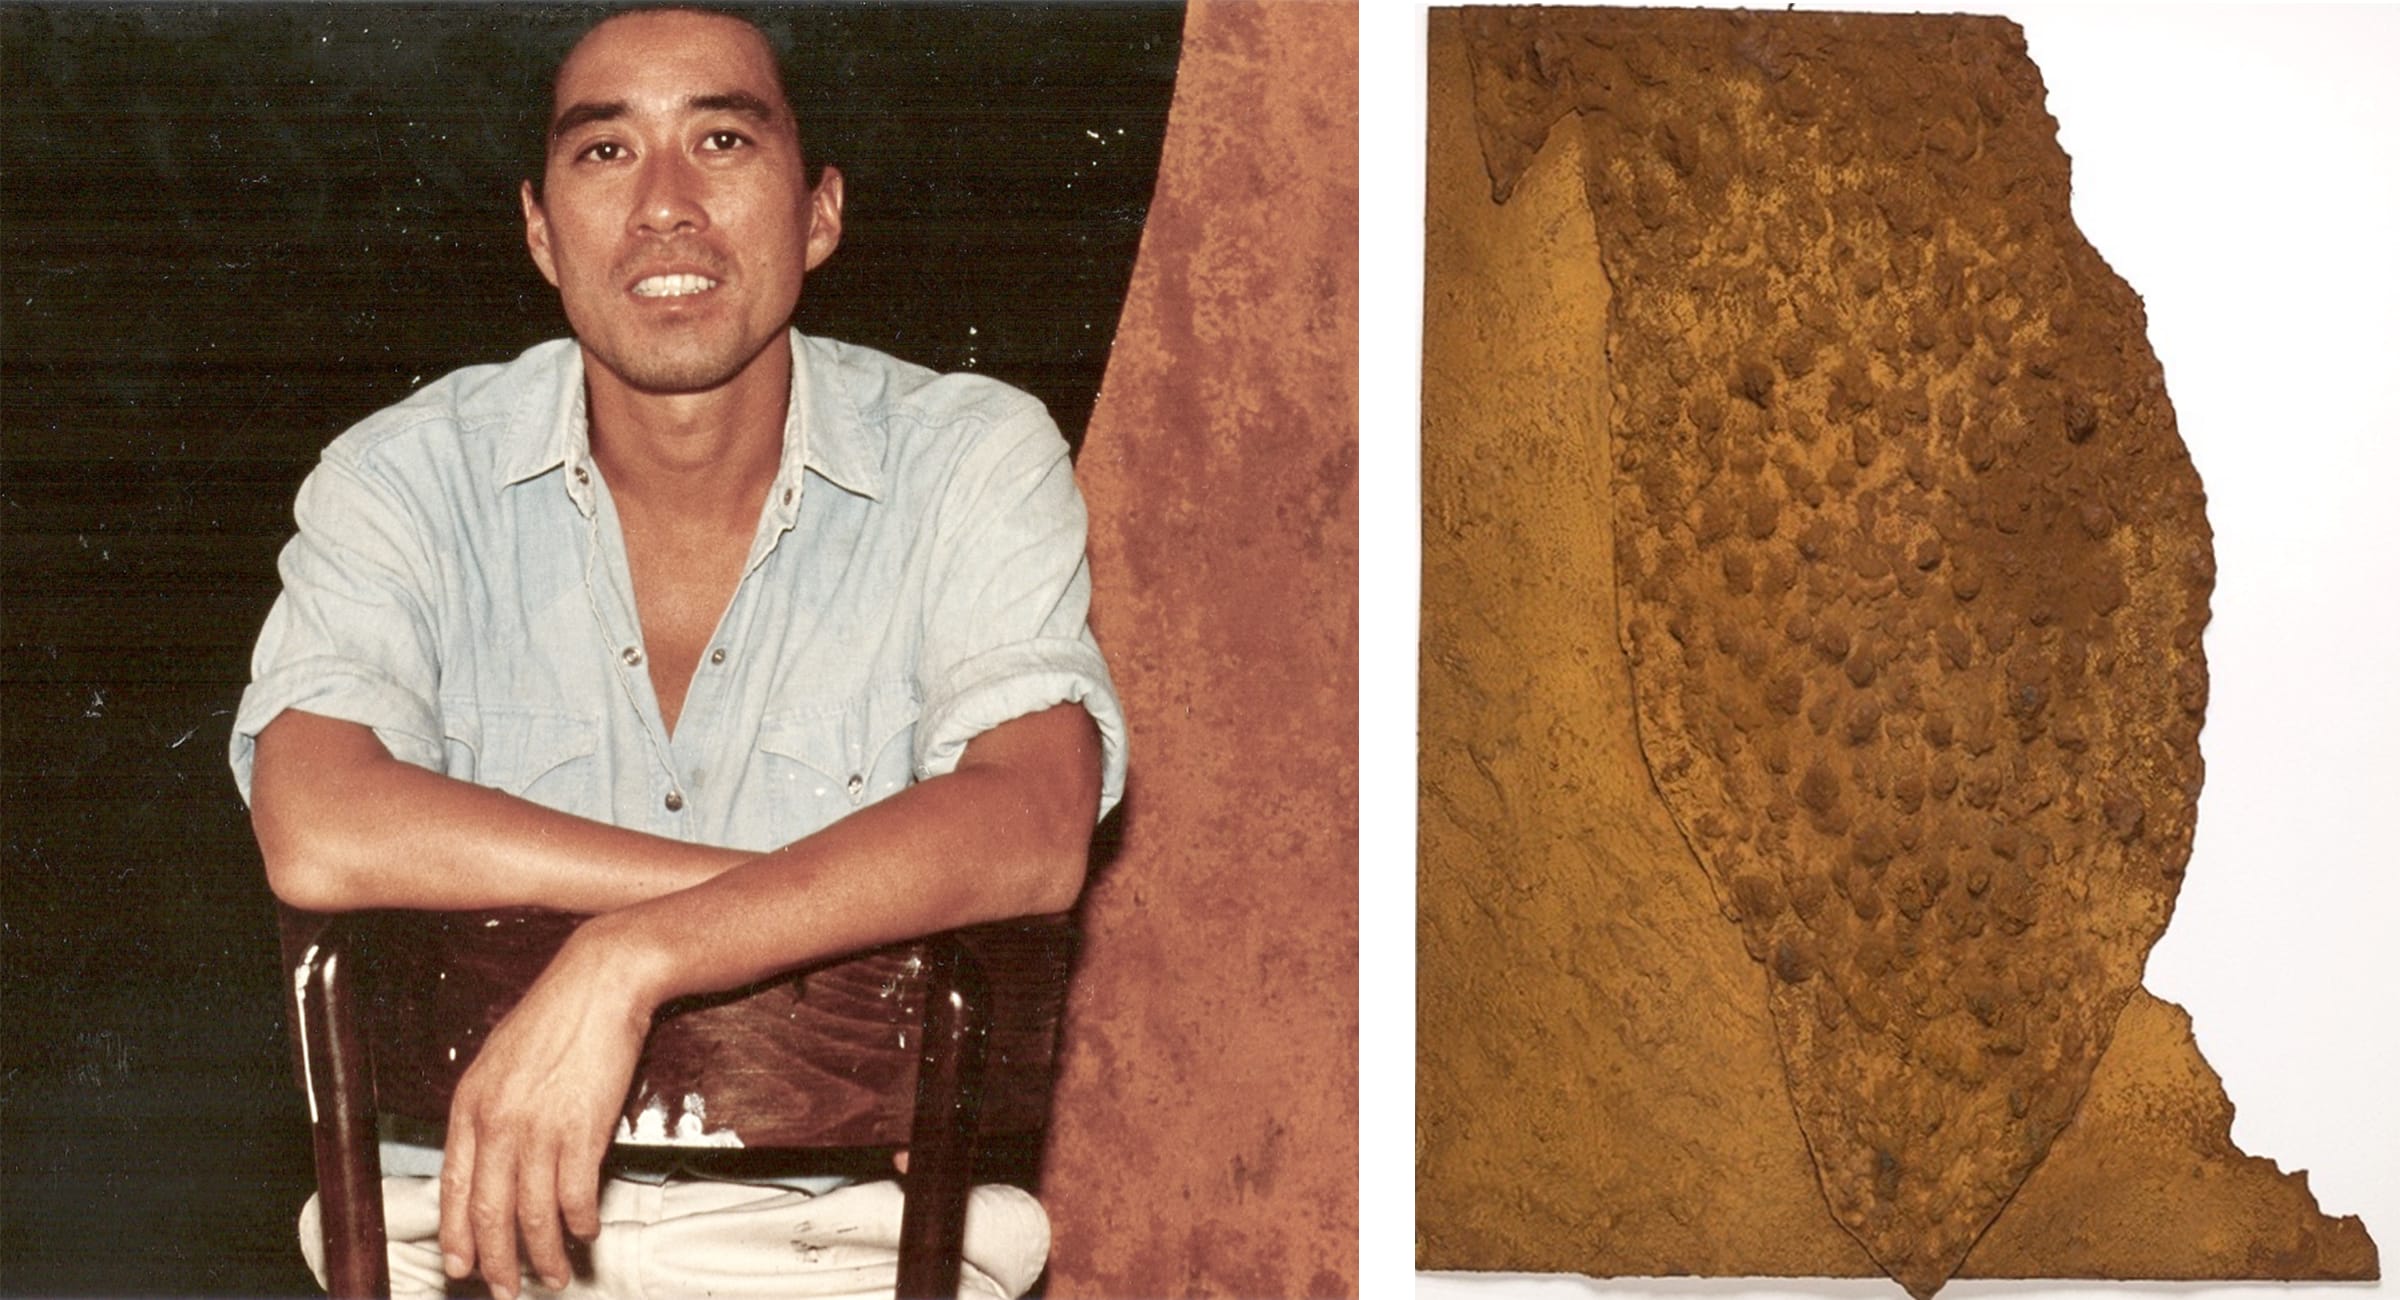 Left: Ching Ho Cheng in front of his alchemical work, Hotel Chelsea, 1988. Photograph by Rita Barros. Right: Ching Ho Cheng, Untitled, 1987. Detroit Institute.